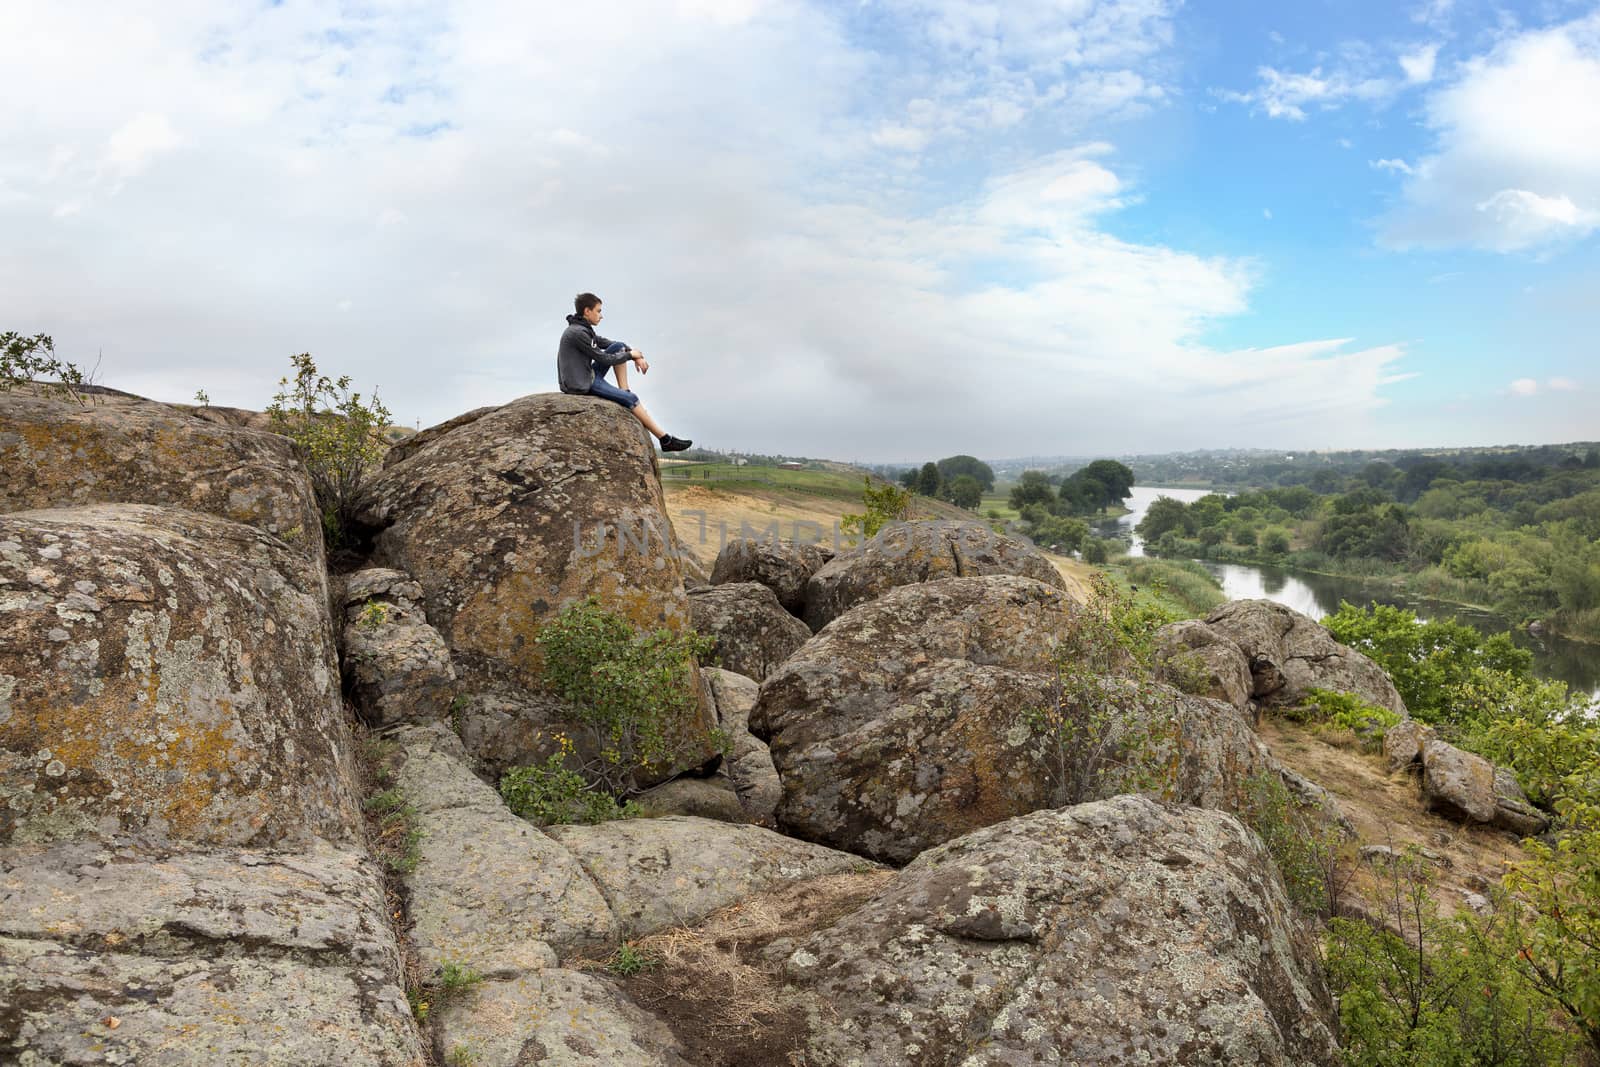 The teenager sits on top of a large stone boulder on the bank of the South Bug River and looks at the river below. The river Southern Bug in the summer - river flow, rocky shores, bright green vegetation and a cloudy blue sky